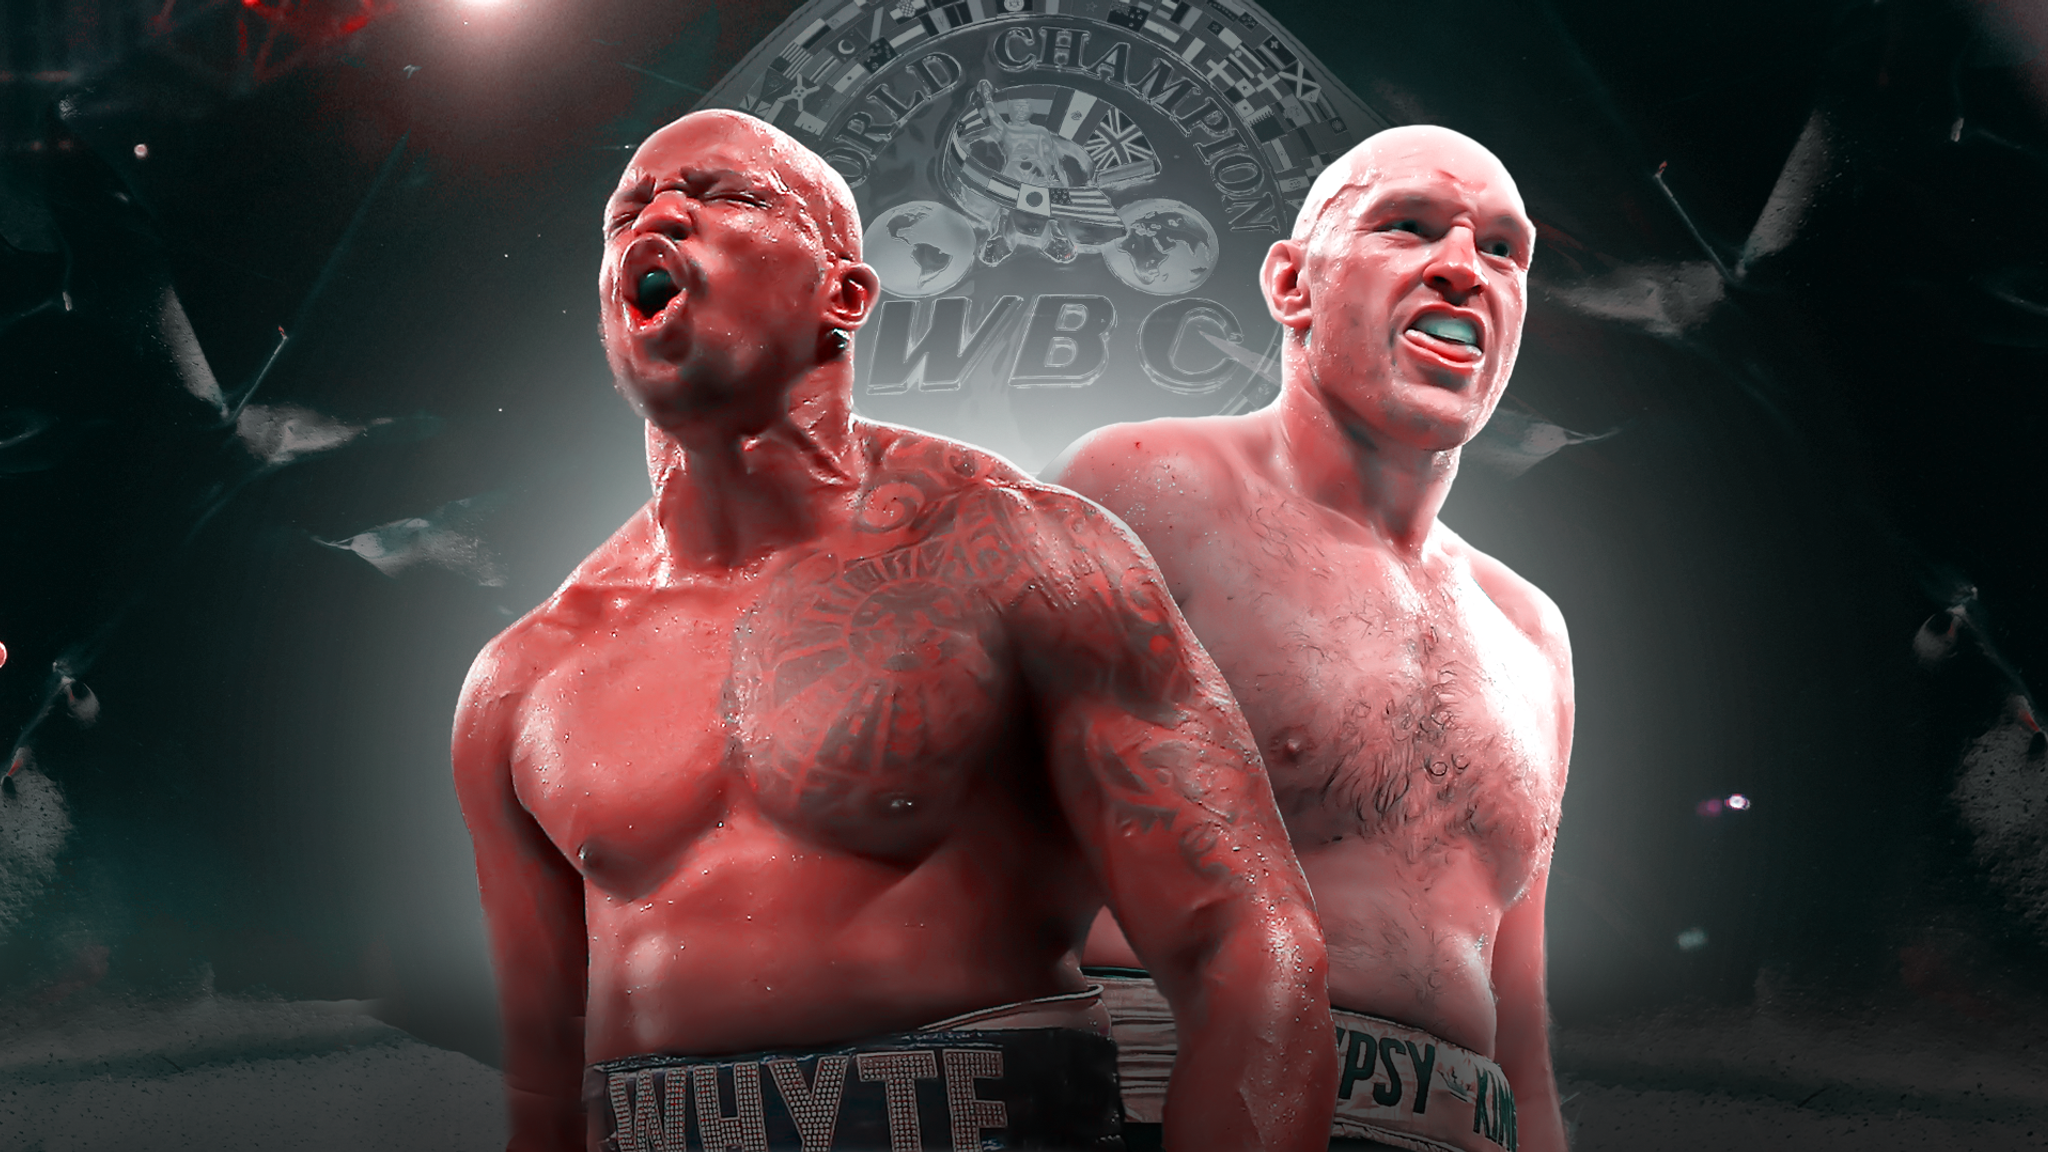 Tyson Fury and Dillian Whyte to fight at Wembley Stadium on April 23 for WBC heavyweight championship Boxing News Sky Sports